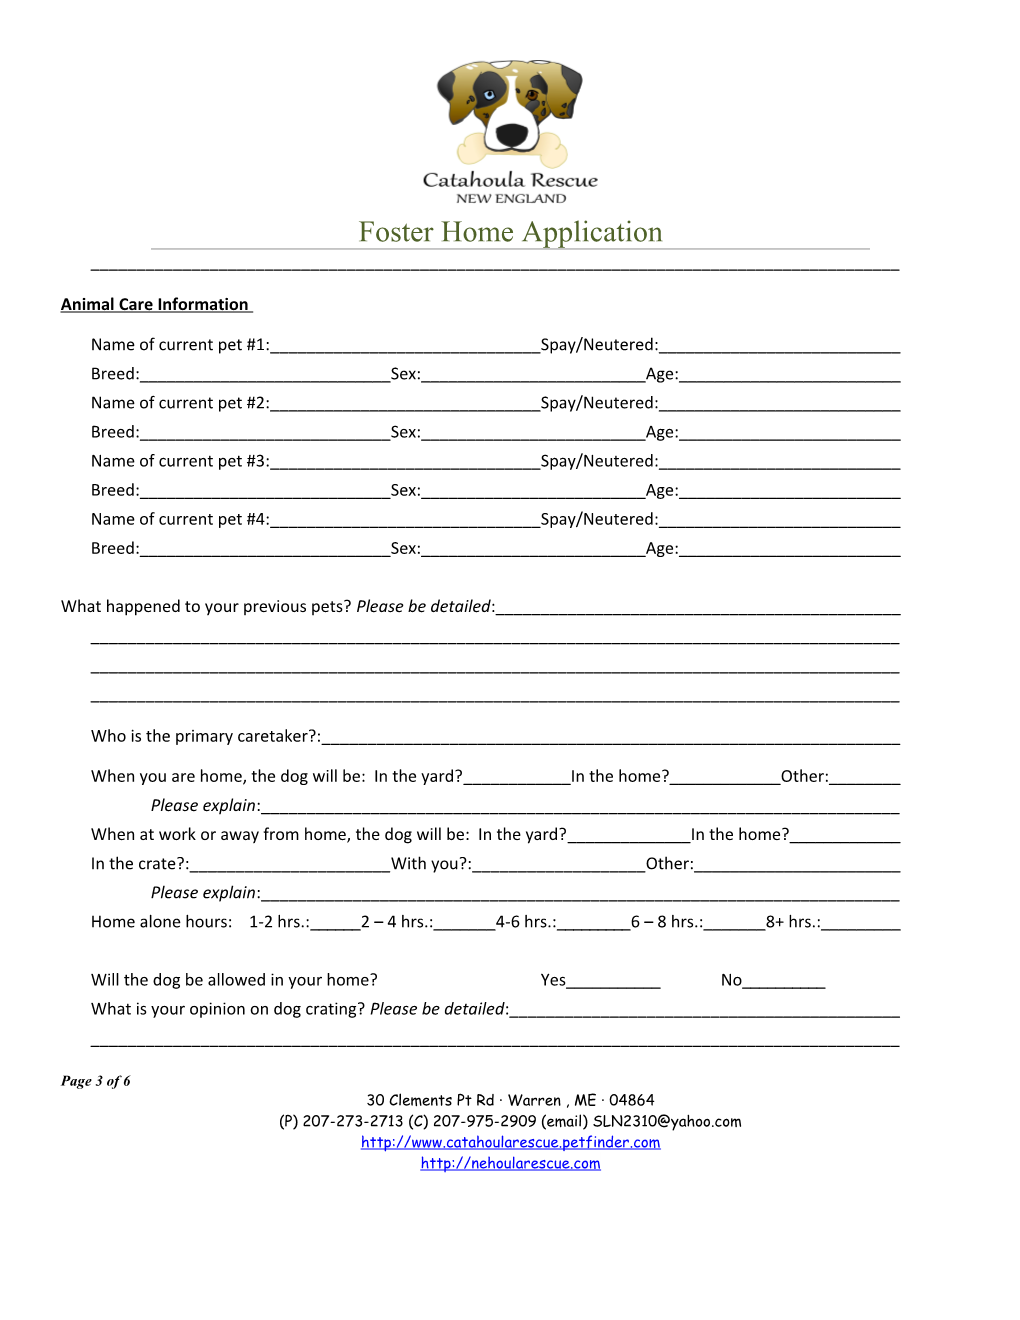 If You Wish to Foster Dogs for Catahoula Rescue, Please Fill out This Form and Mail To: 3036 E